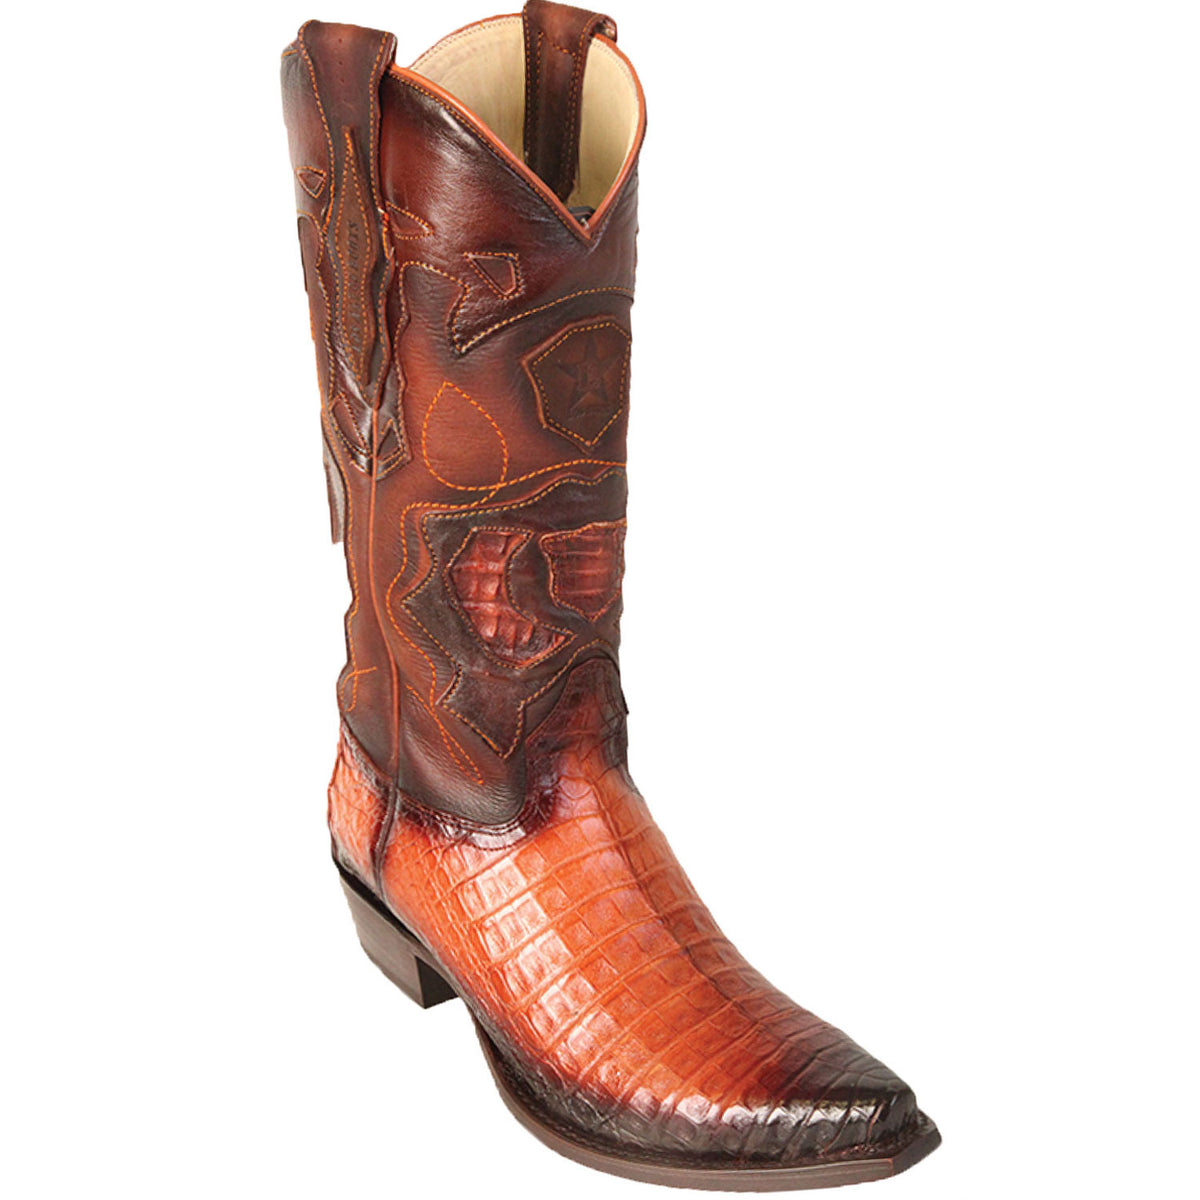 Caiman Belly Skin Boot LAB-9482